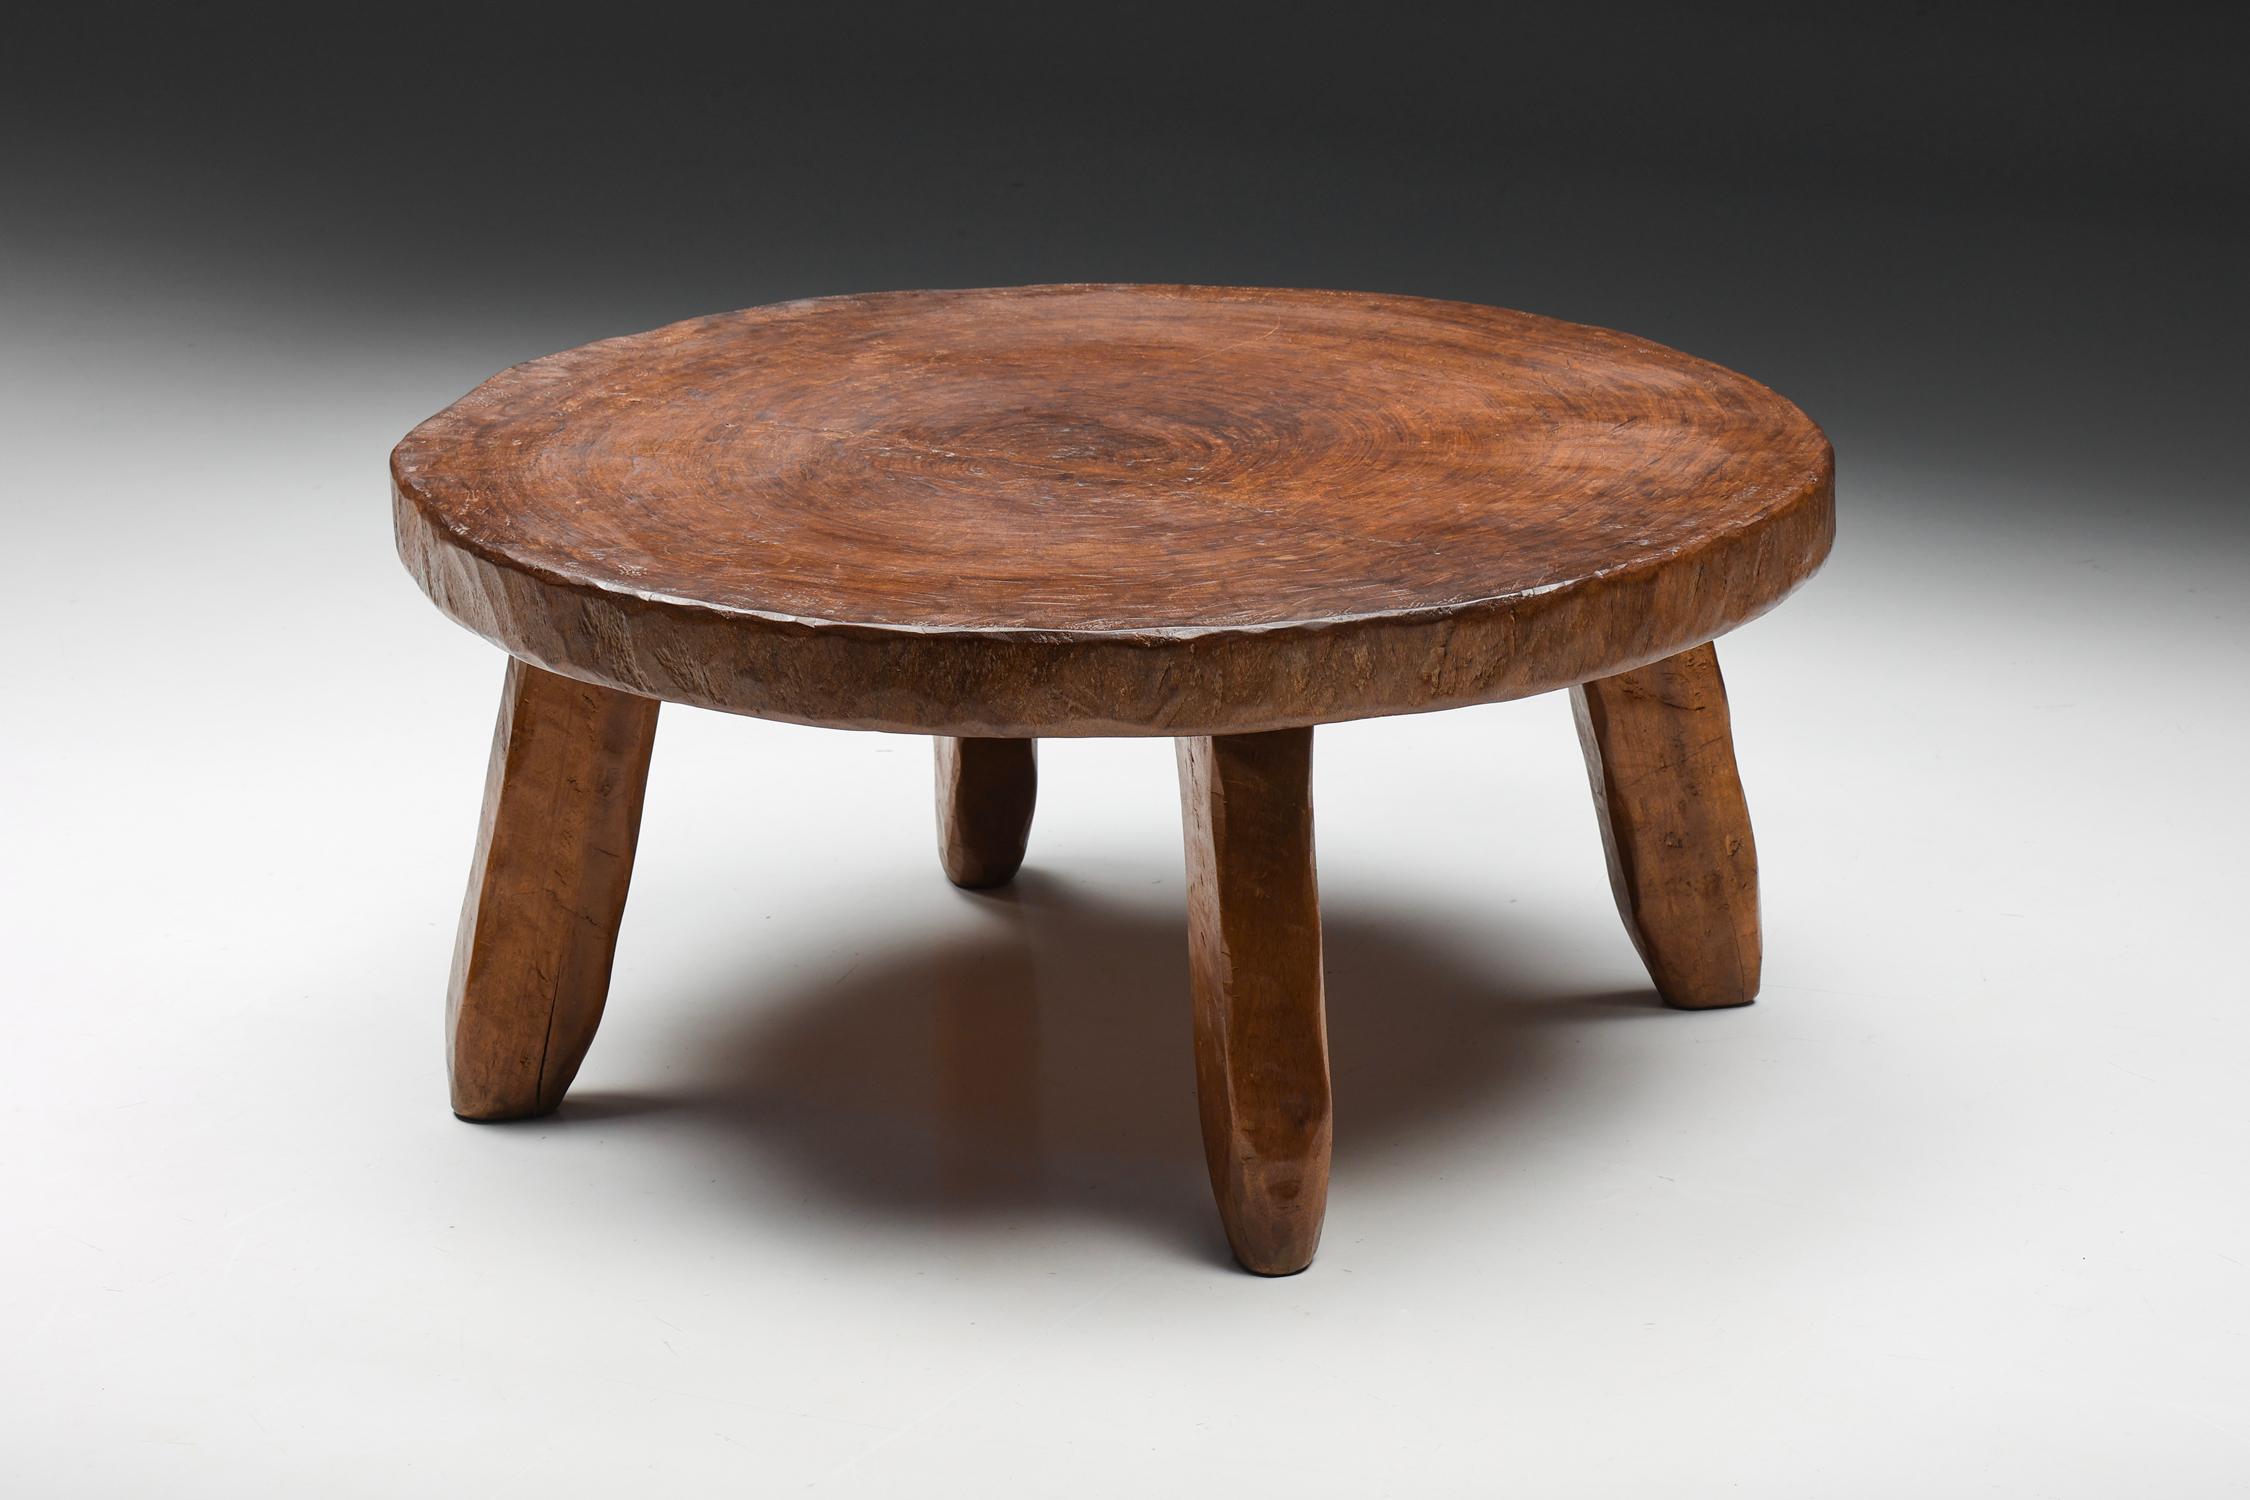 Rustic Wabi-Sabi Round Wooden Coffee Table, France, 1950's

This rustic round coffee table with a four-legged base is made of wood with a very charismatic patina. The rounded surface provides space for objects like magazines and other curiosities.